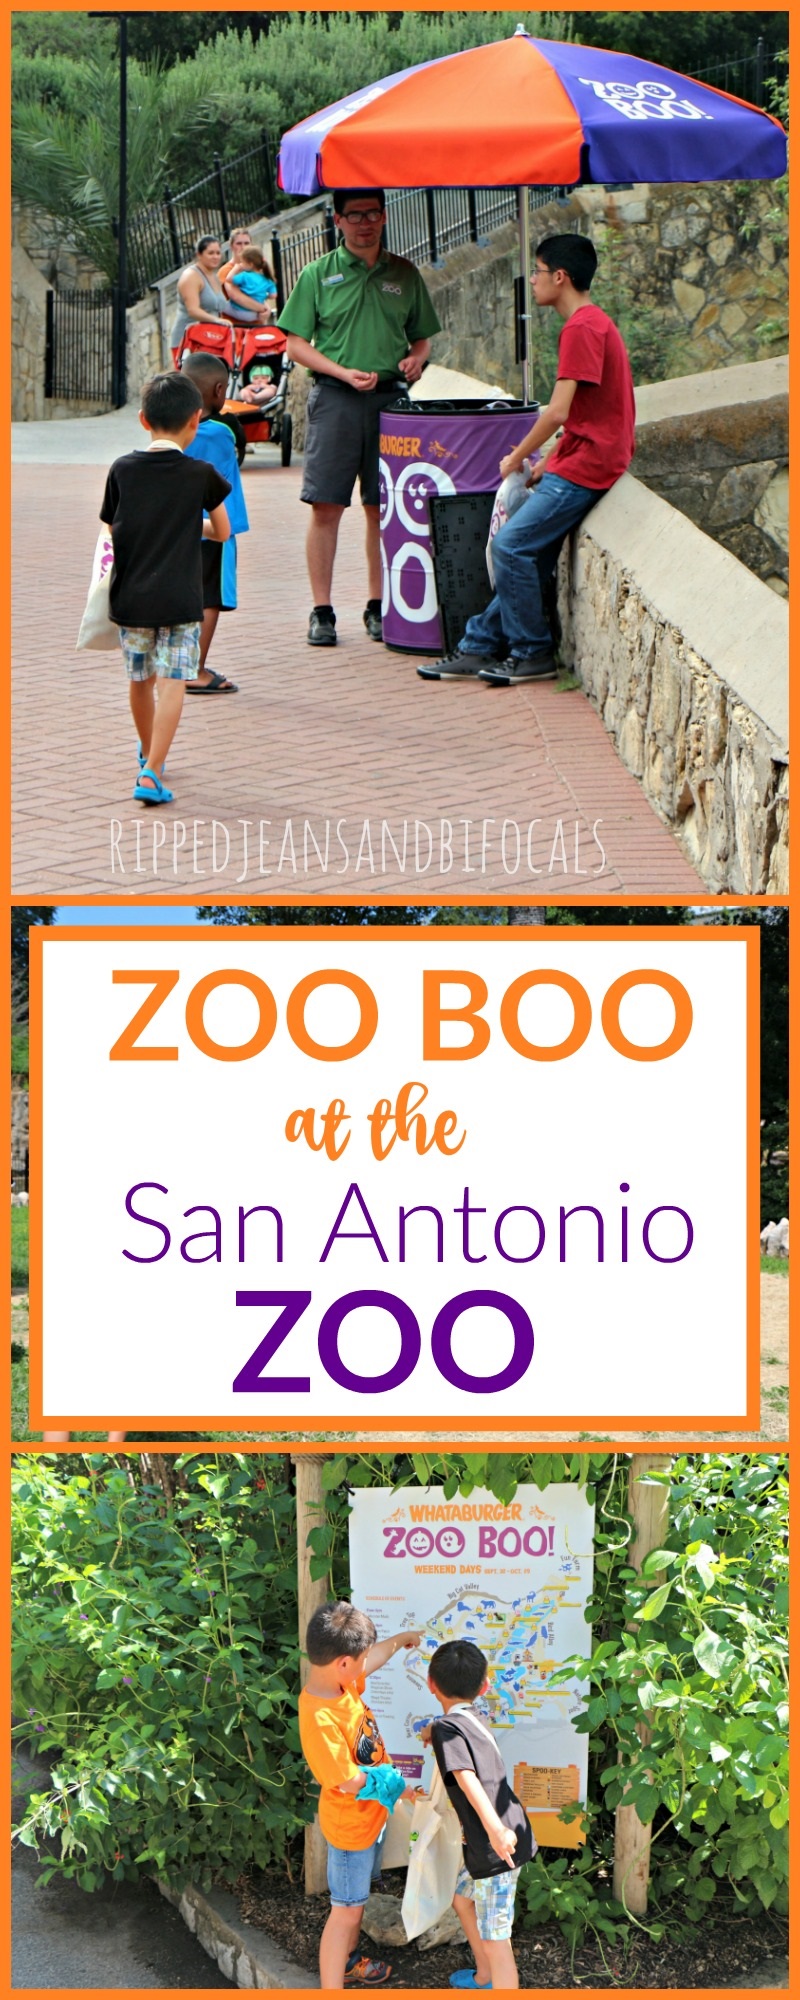 Zoo Boo at the San Antonio Zoo|Ripped Jeans and Bifocals